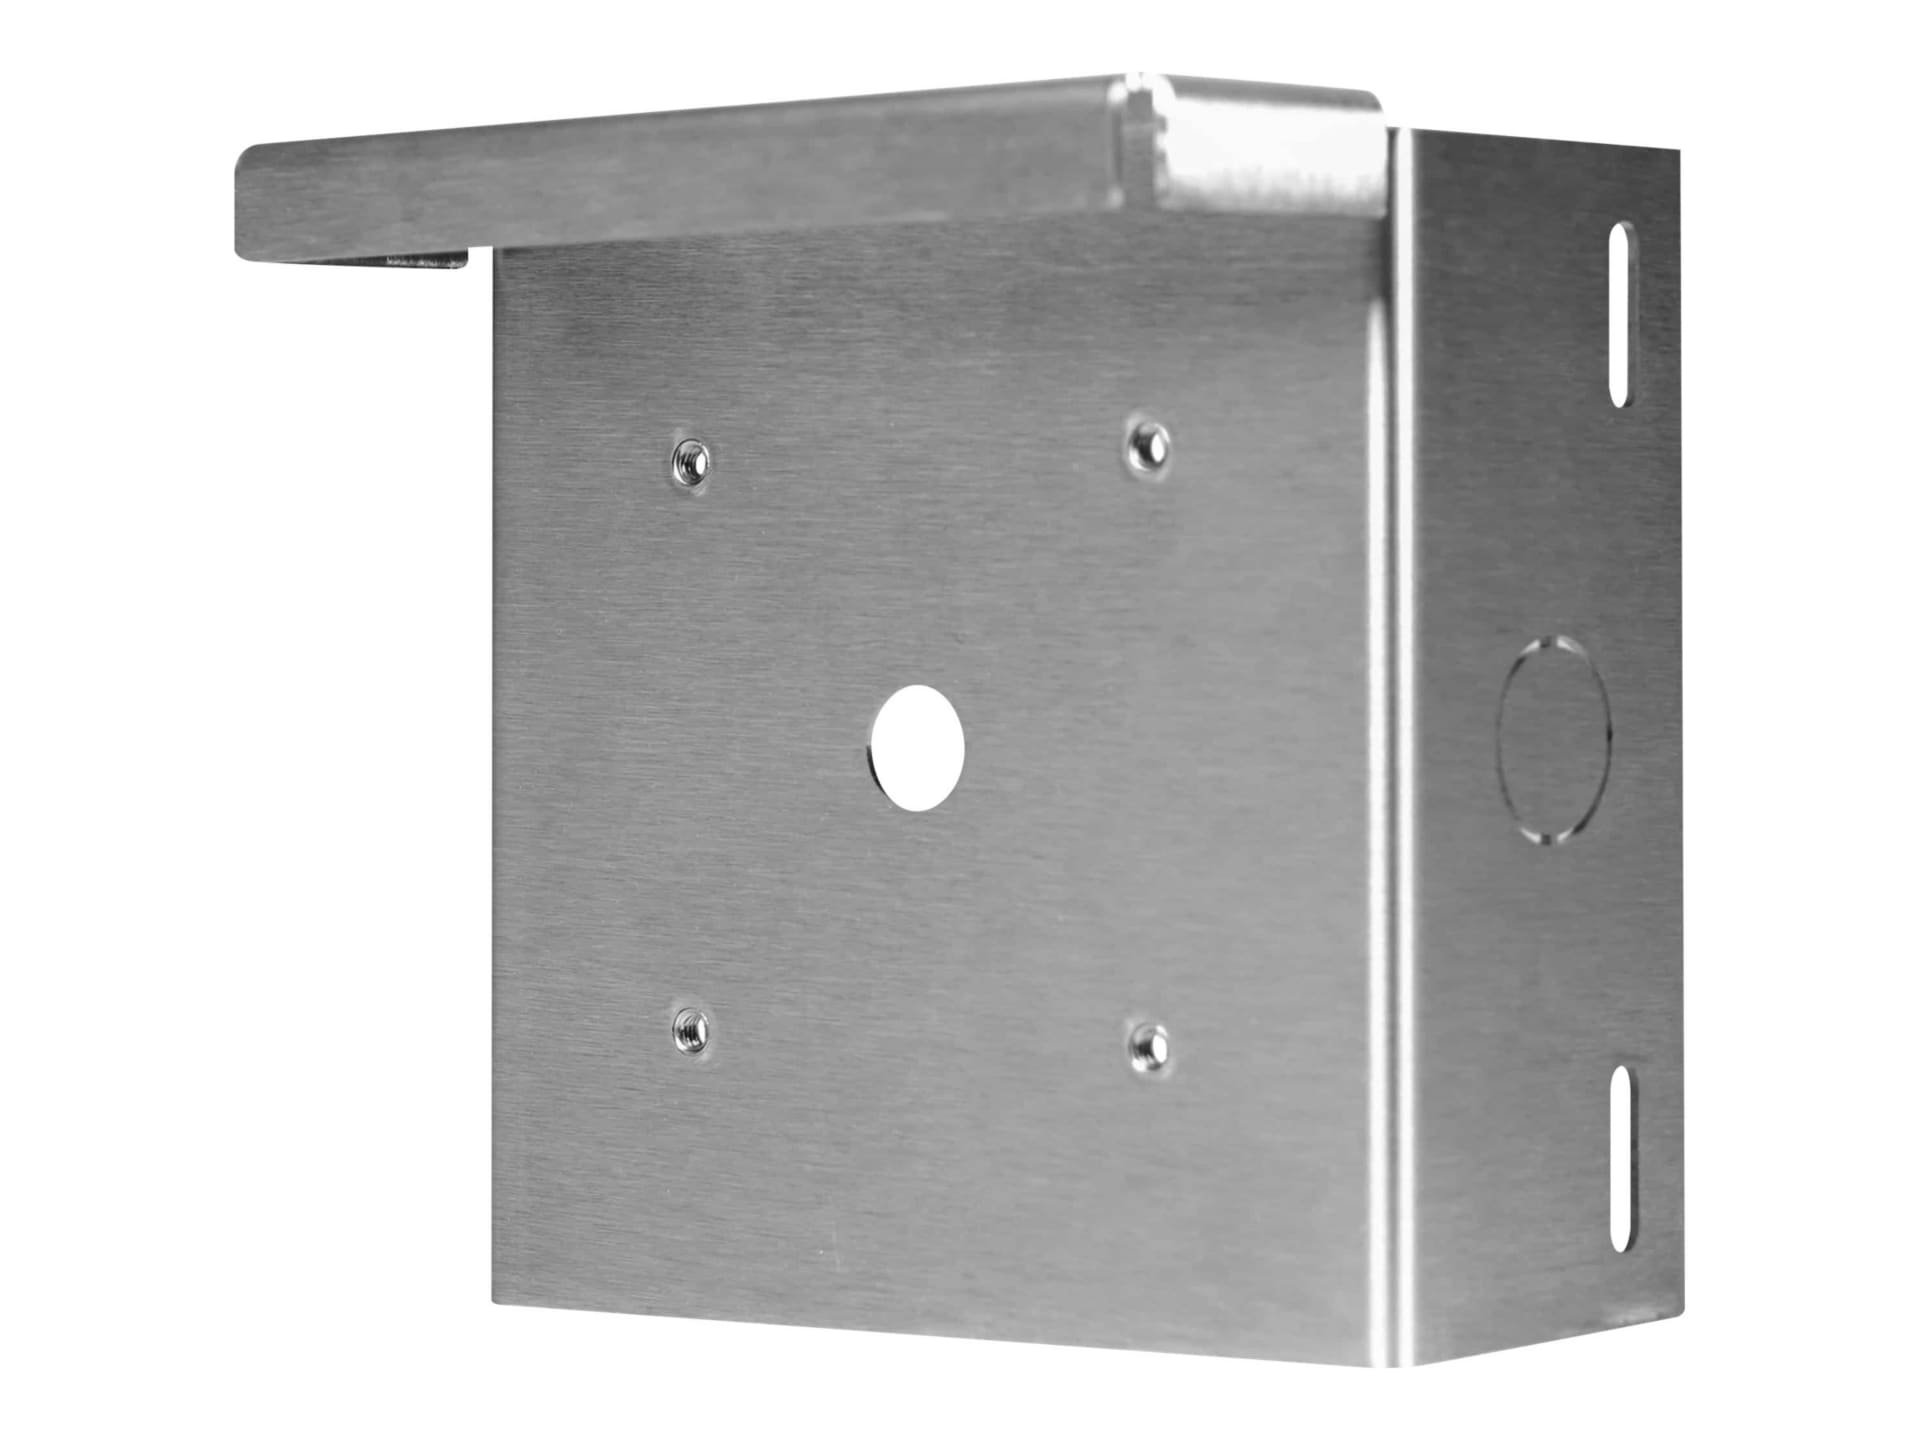 Algo Pole Mount Bracket for 8186 IP,8196 IP PoE+,and 1196 Satellite Horn Sp